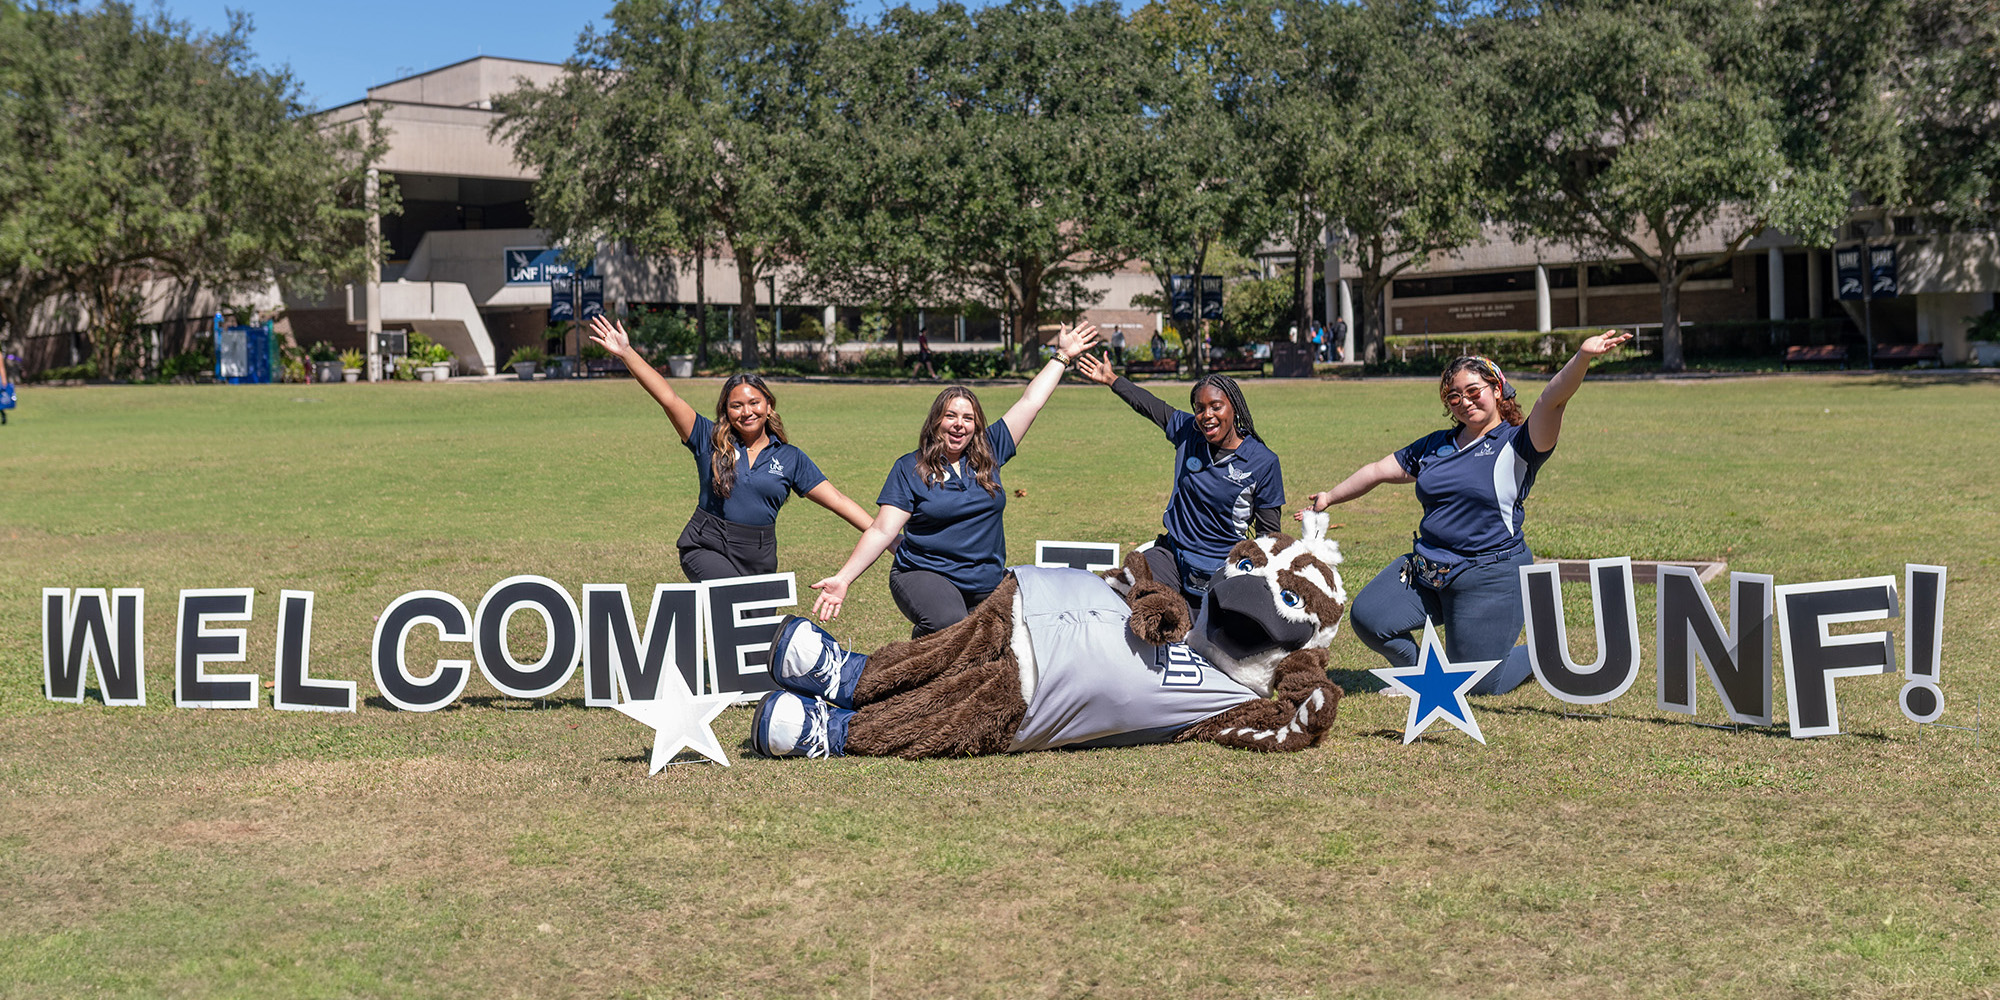 Ozzie and students posing around a welcome to unf sign on campus